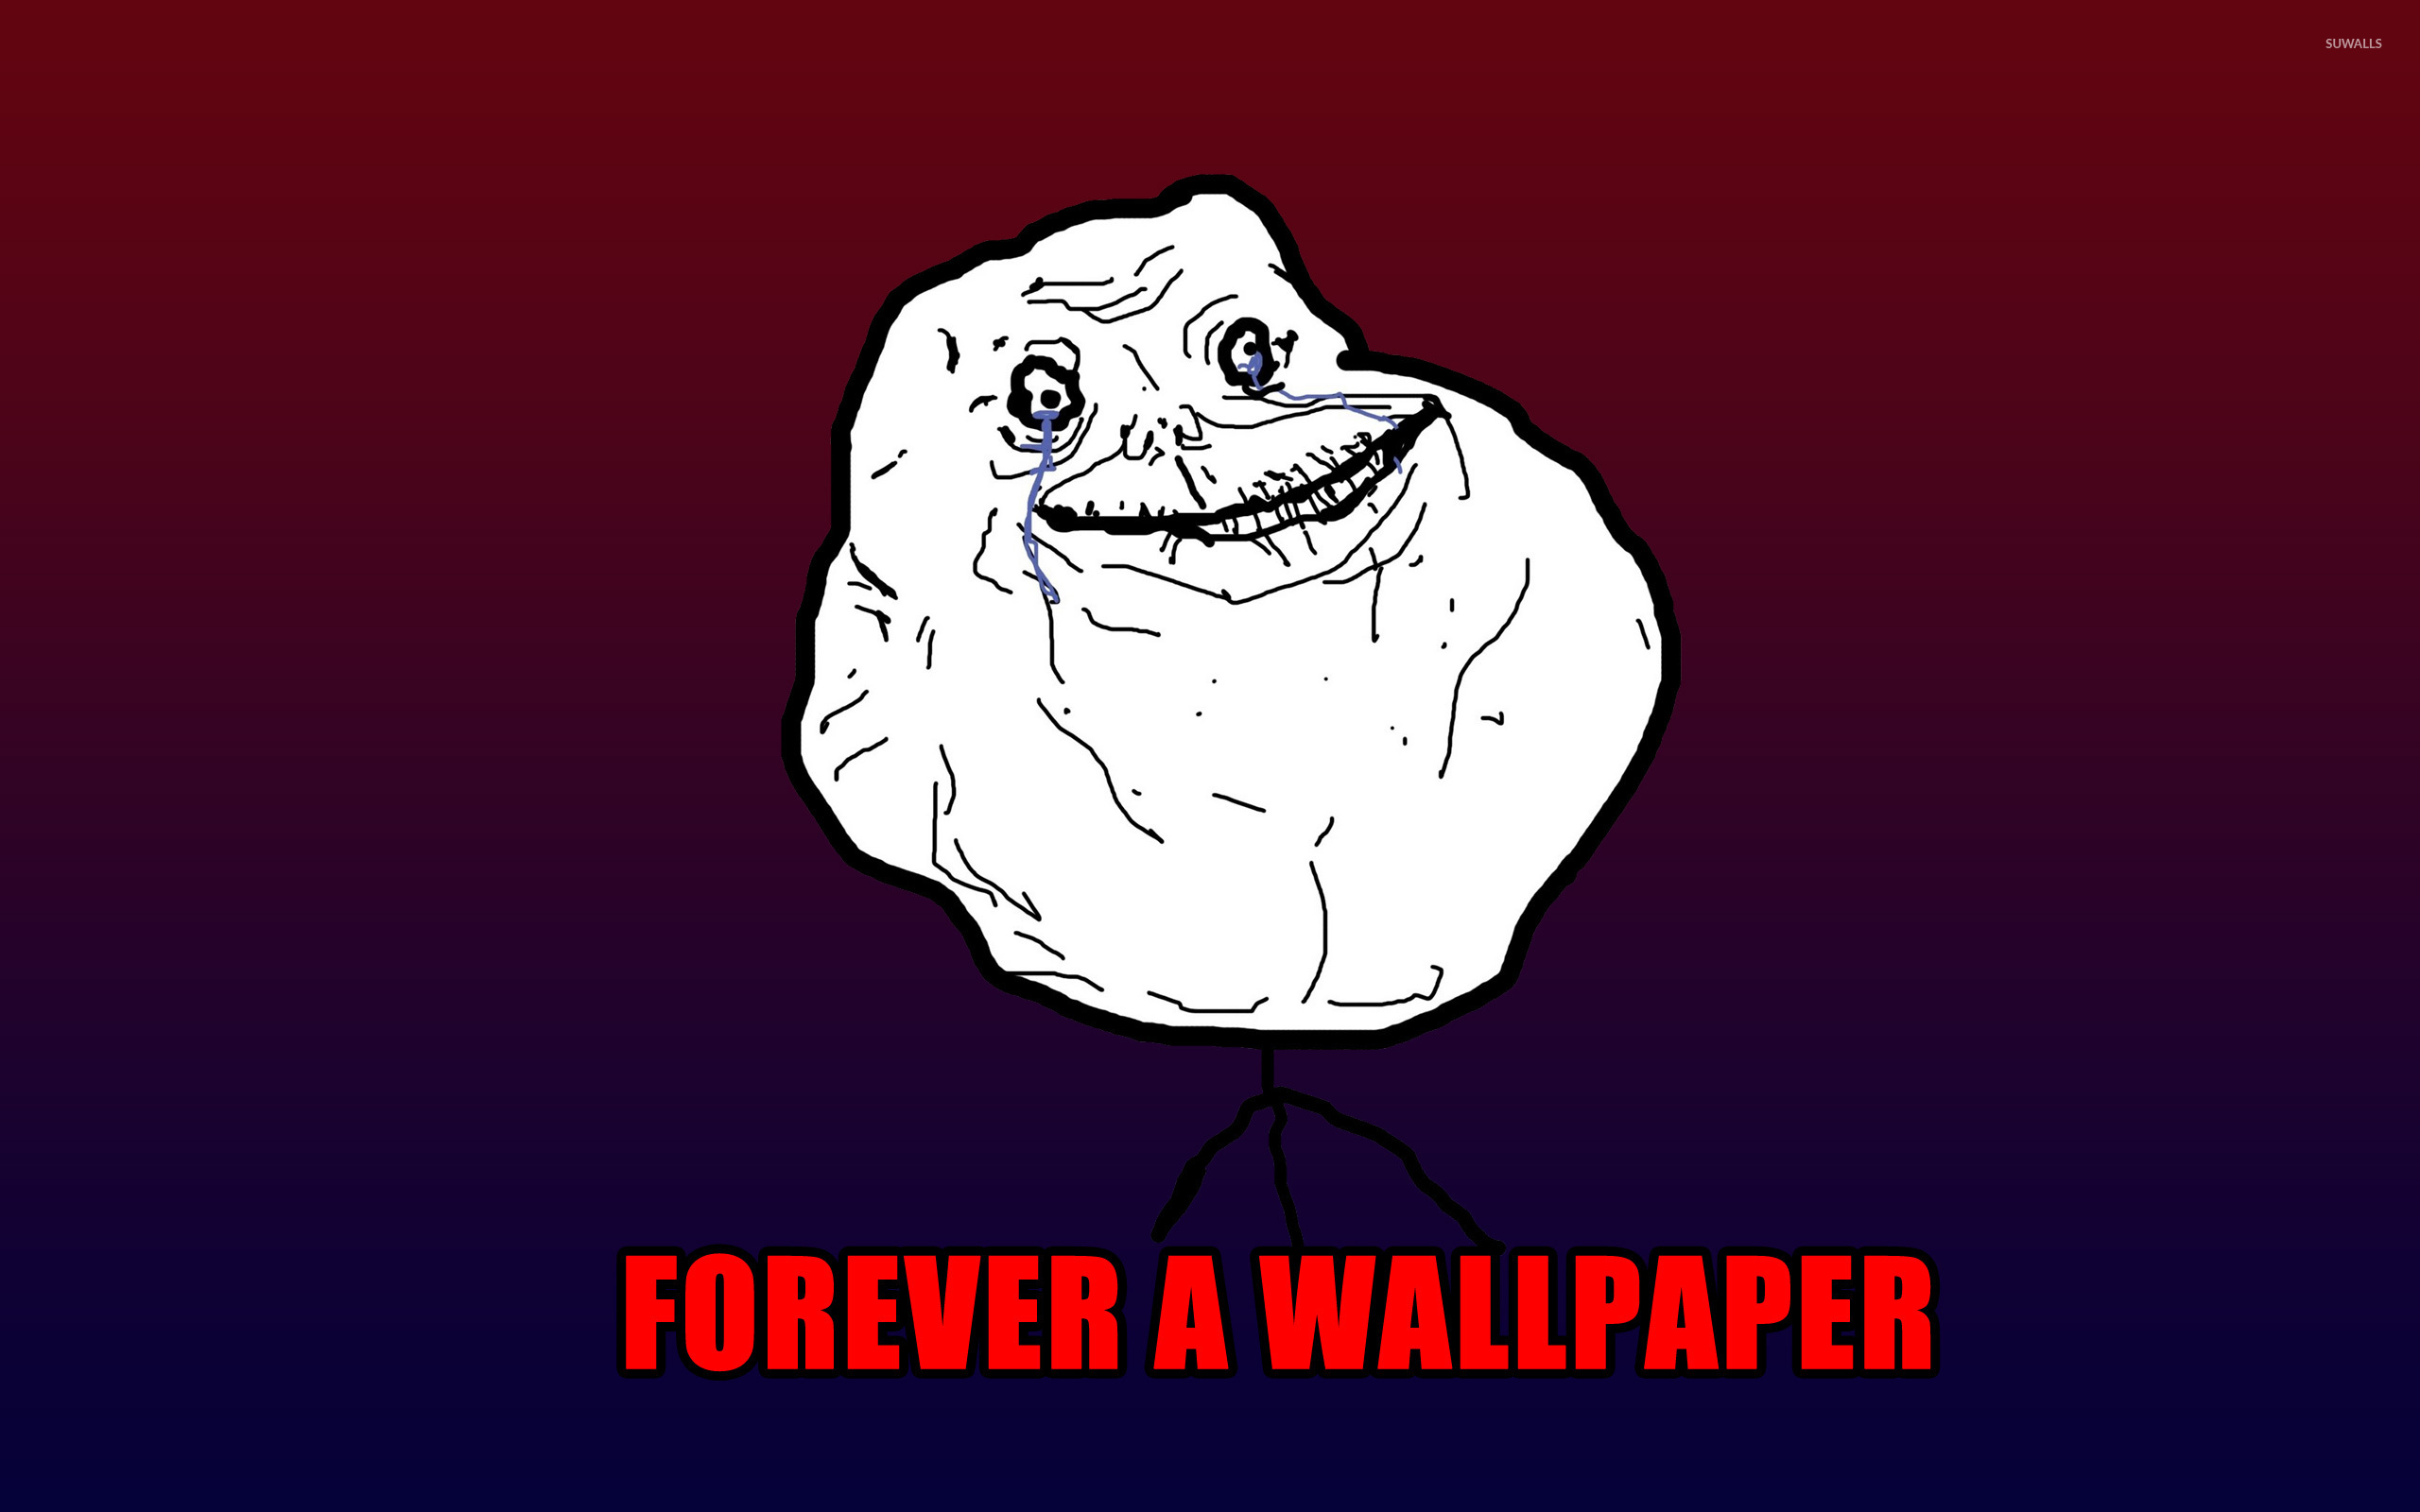 Forever alone wallpapers. 